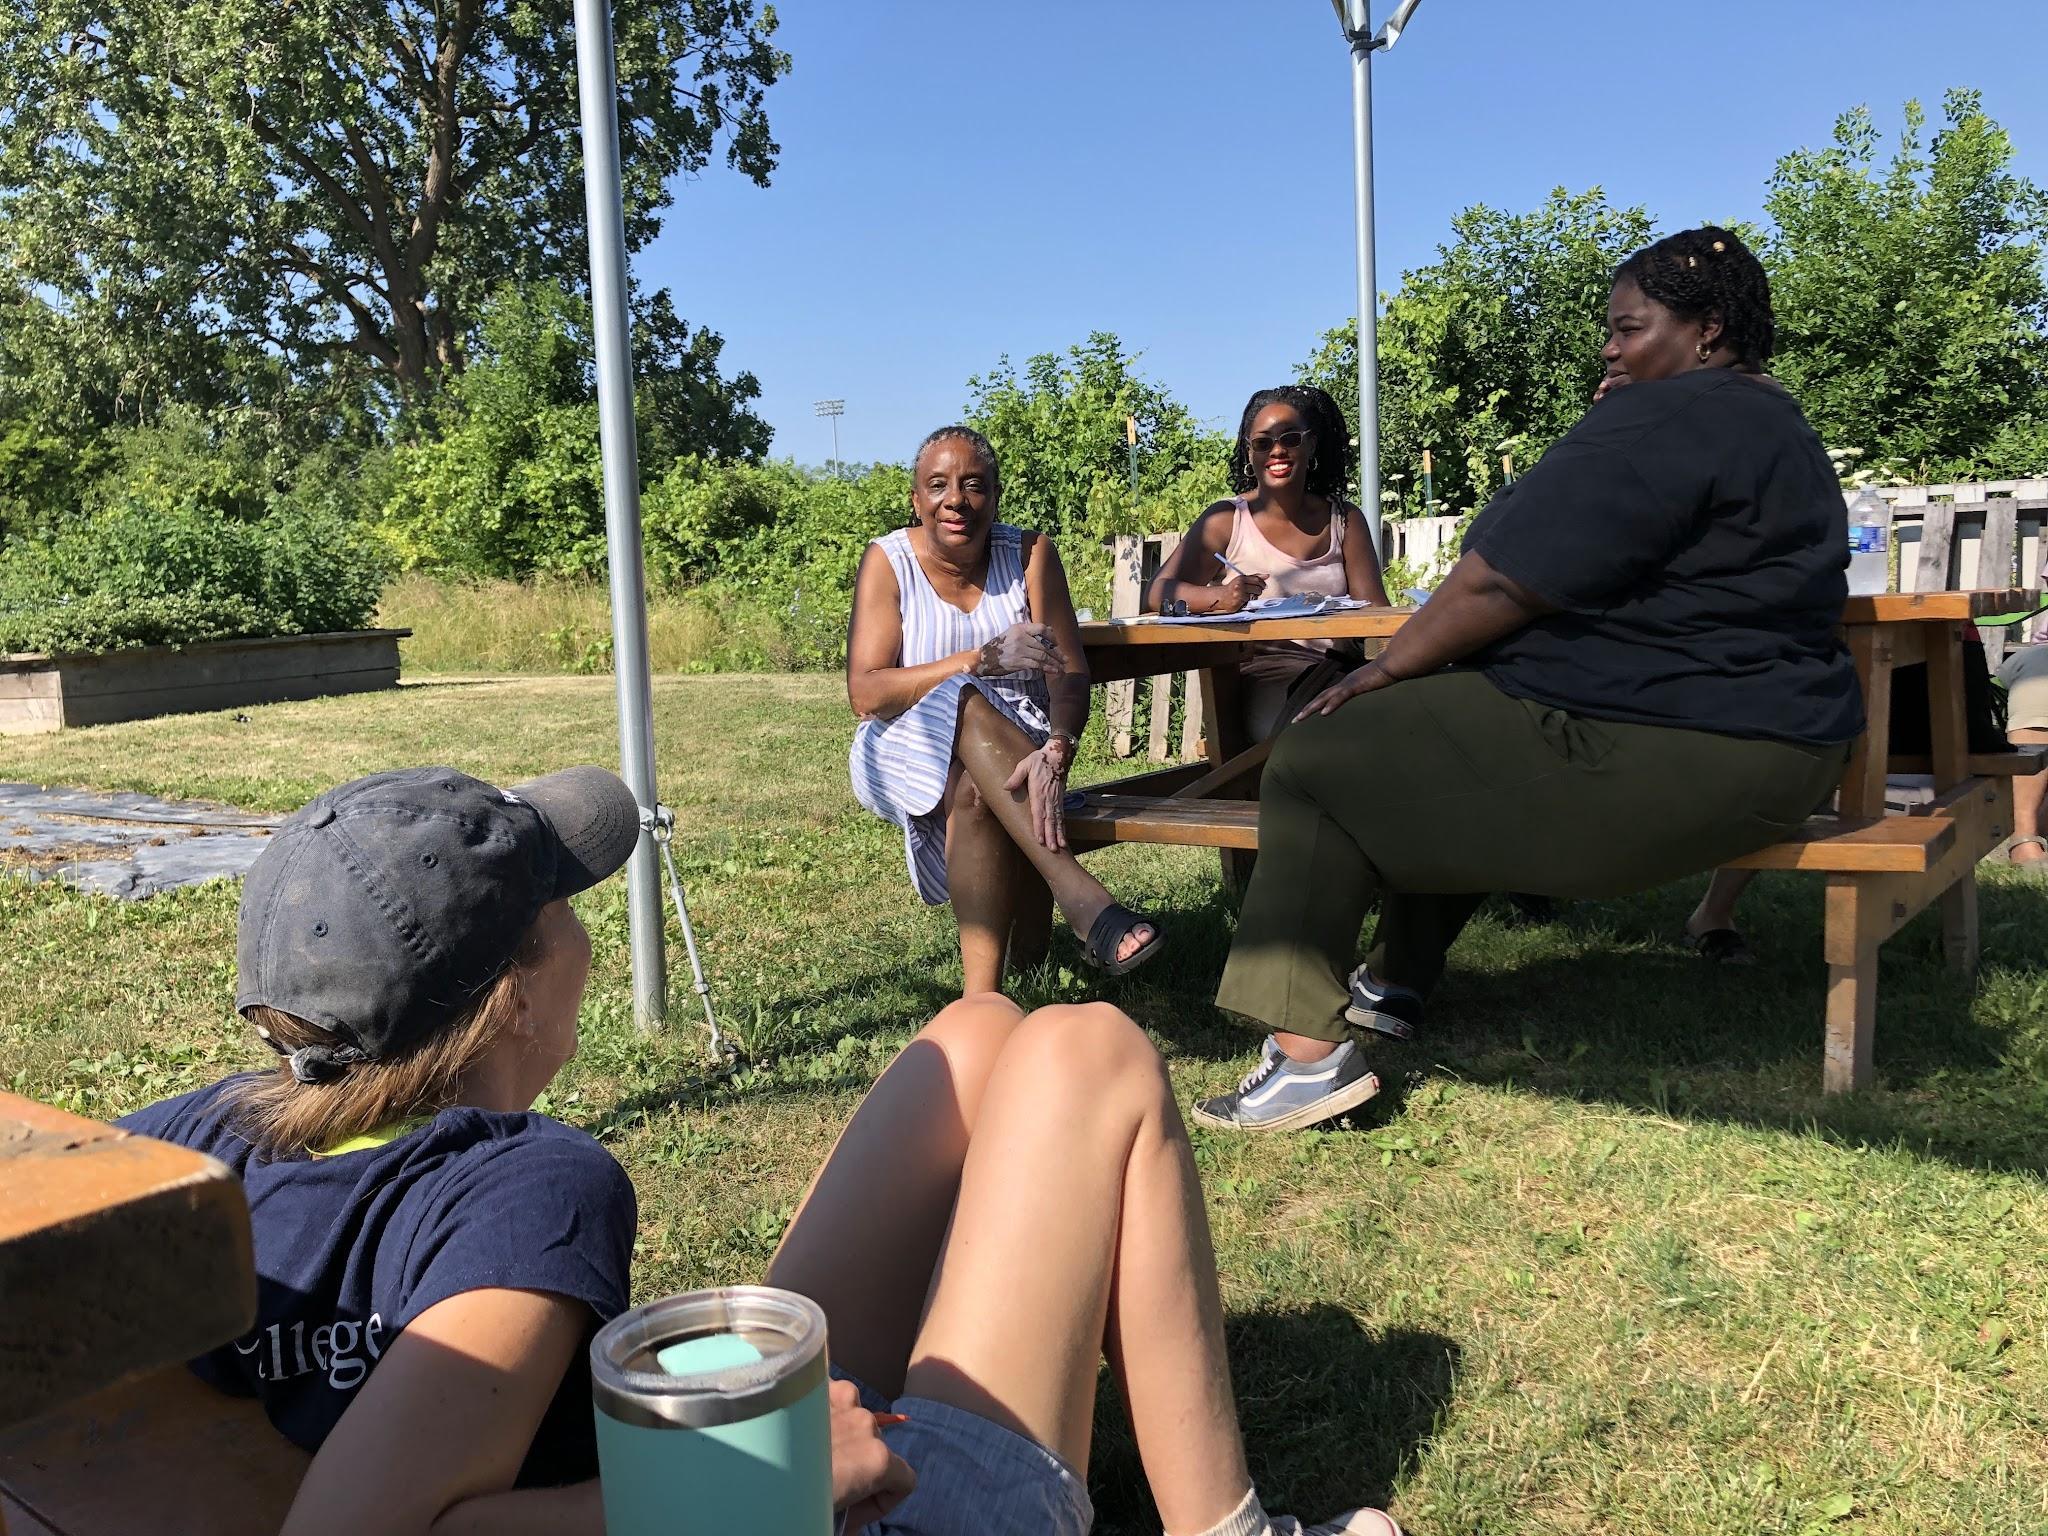 Science teacher Shirley Brezzell (left, at picnic table) shares her experiences with other teachers who participated in a professional learning community as part of Teaching Science Outdoors: Urban Partnerships.